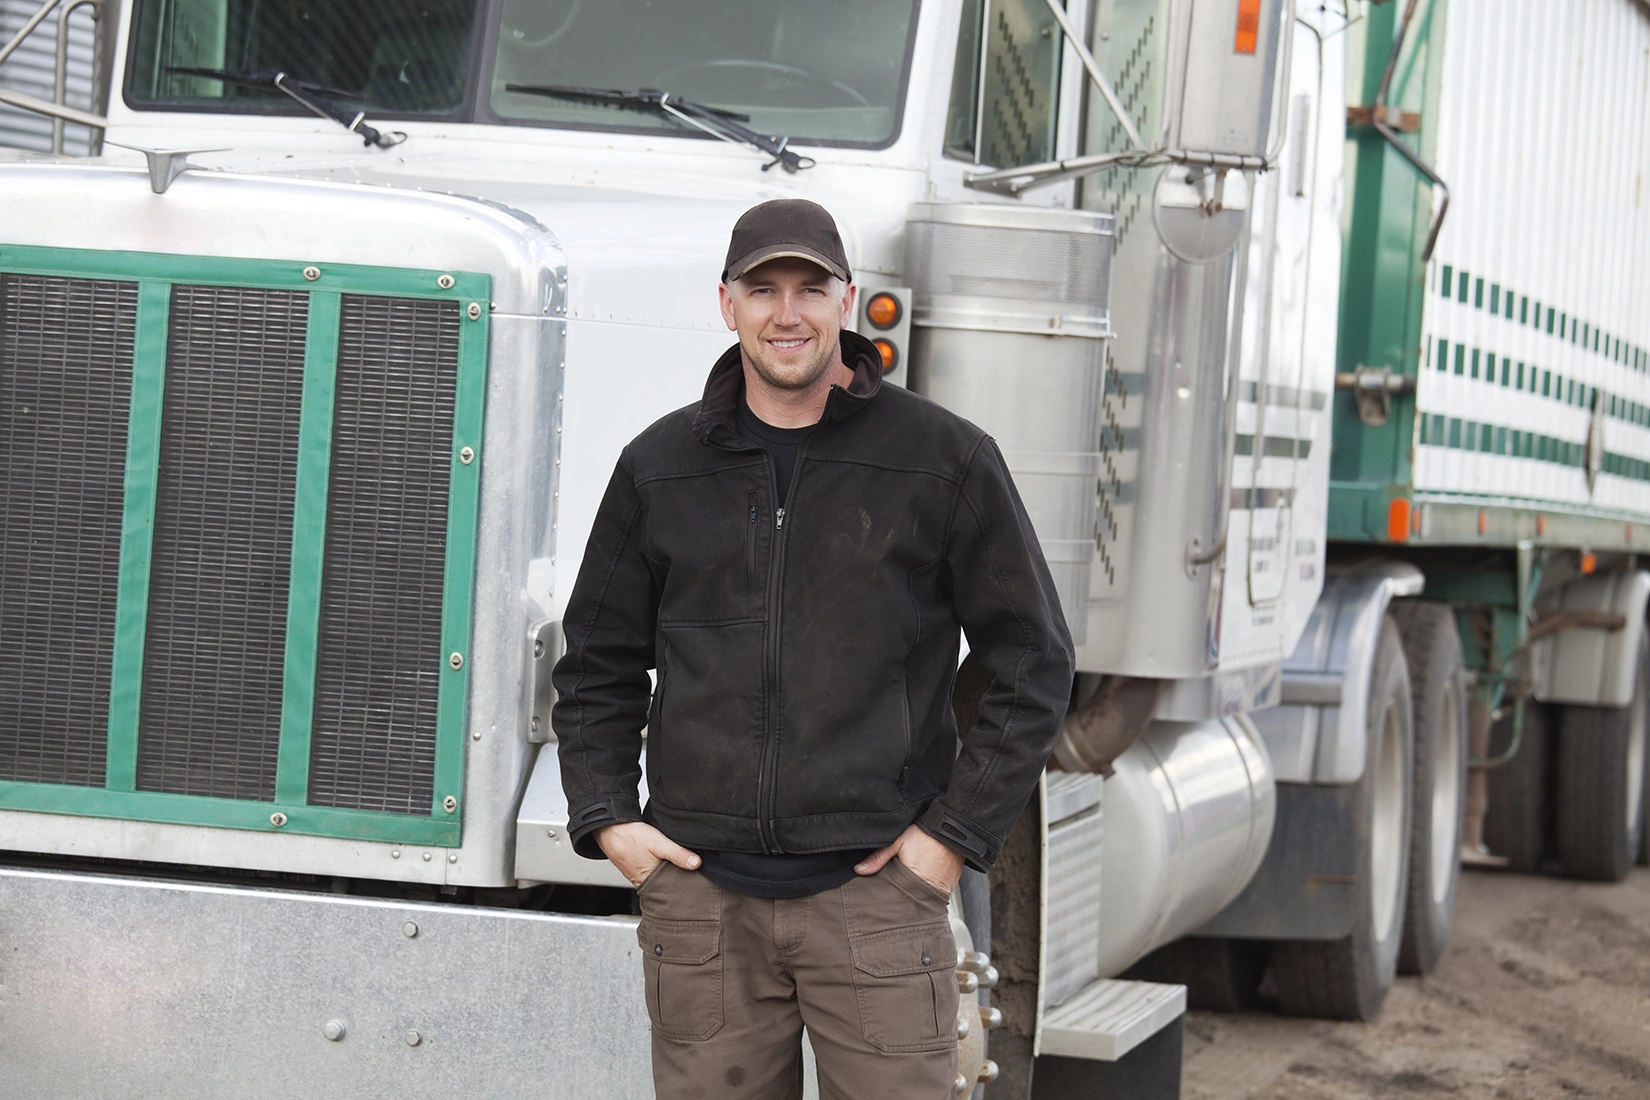 CDL CDA COMMERCIAL DRIVING ACADEMY